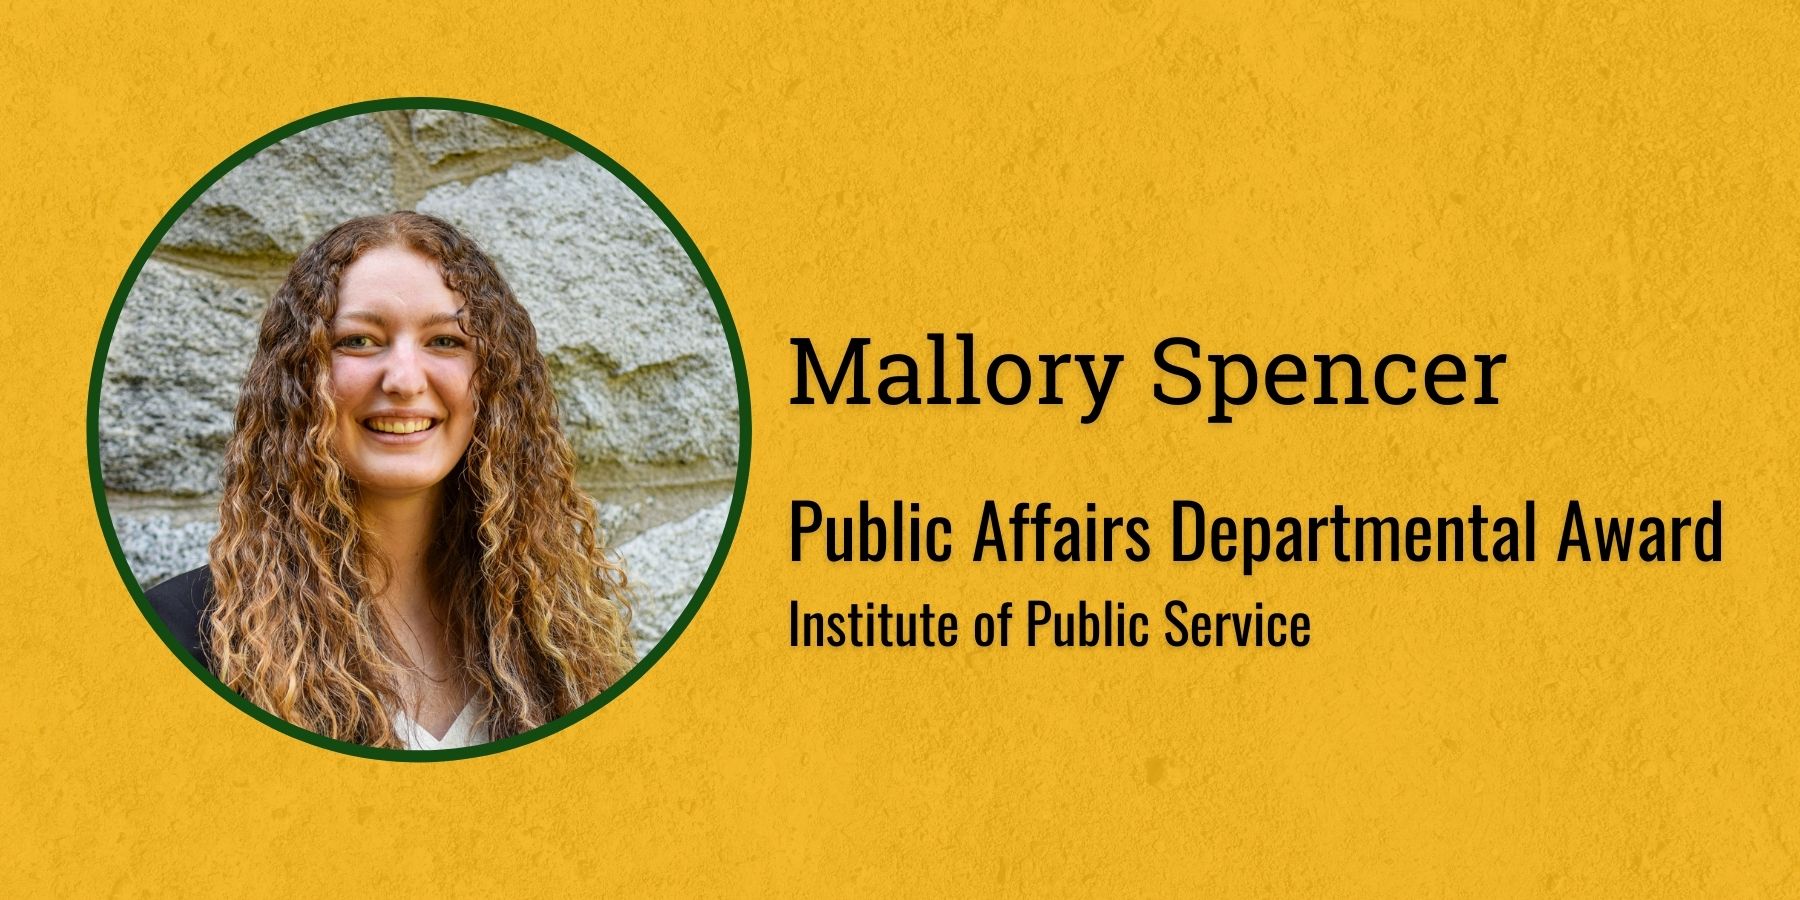 photo of Mallory Spencer and text